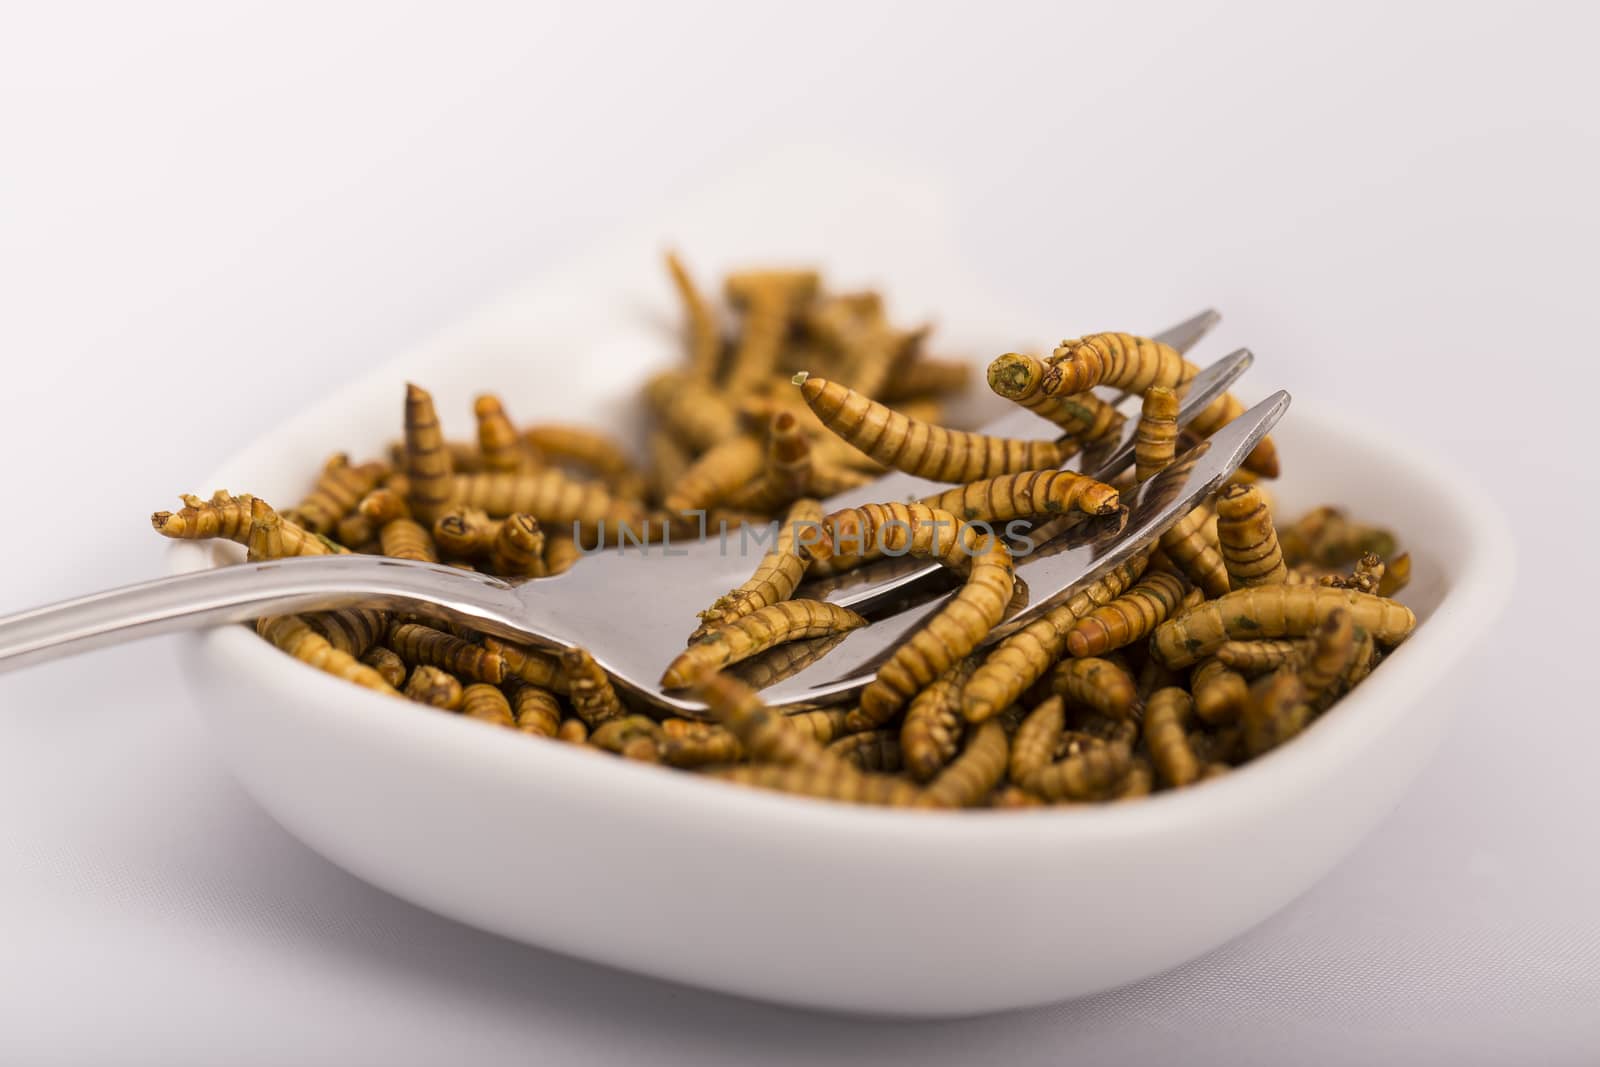 Fried insects, molitors by CatherineL-Prod